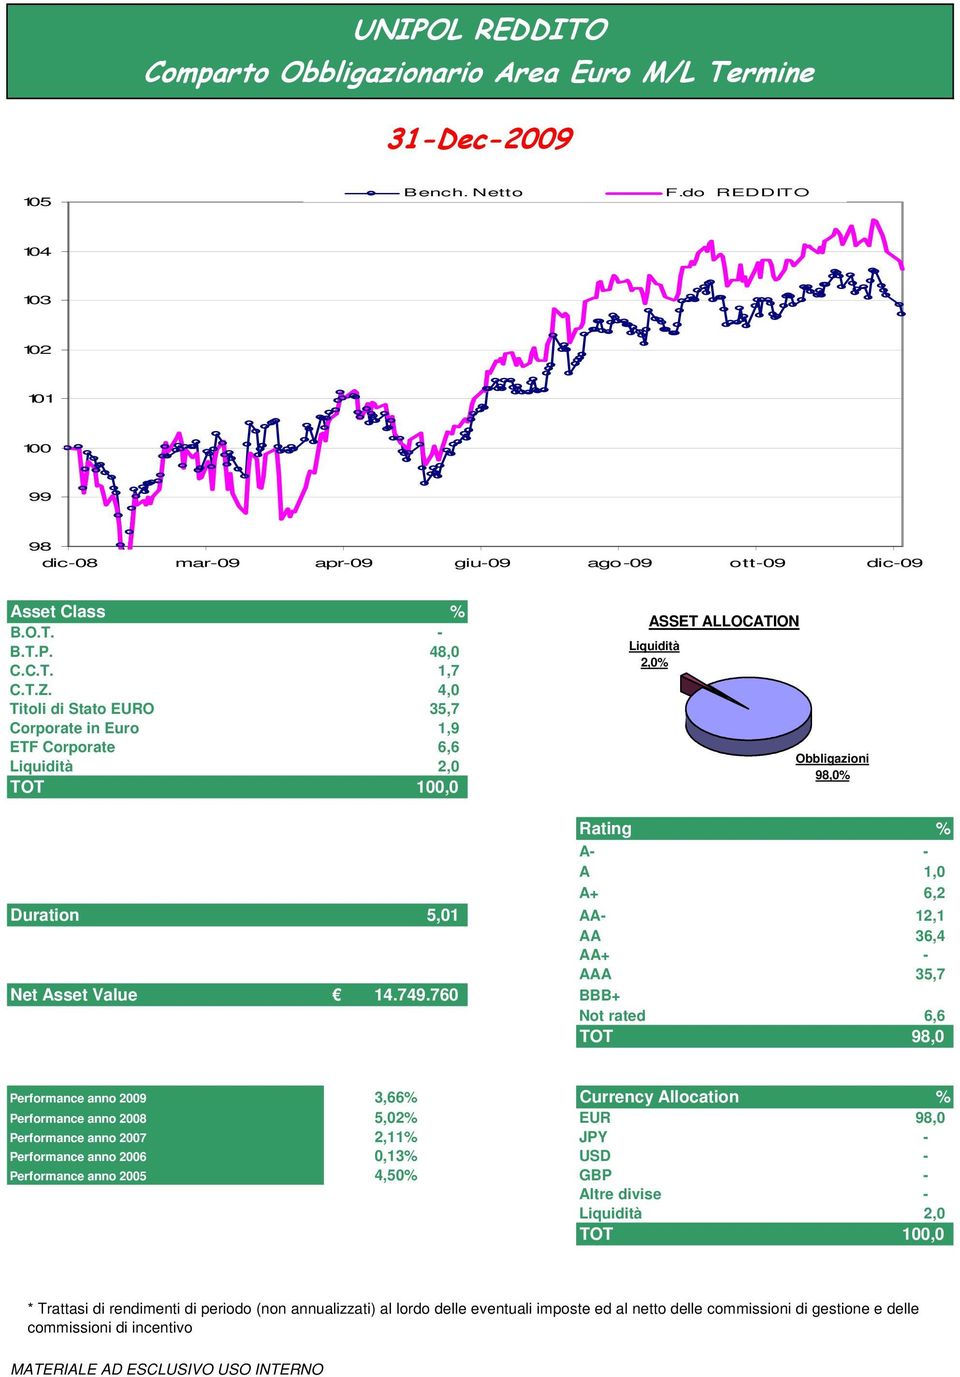 760 BBB+ Not rated 6,6 TOT 98,0 Performance anno 2009 3,66% Currency Allocation % Performance anno 2008 5,02% EUR 98,0 Performance anno 2007 2,11% JPY - Performance anno 2006 0,13% USD -